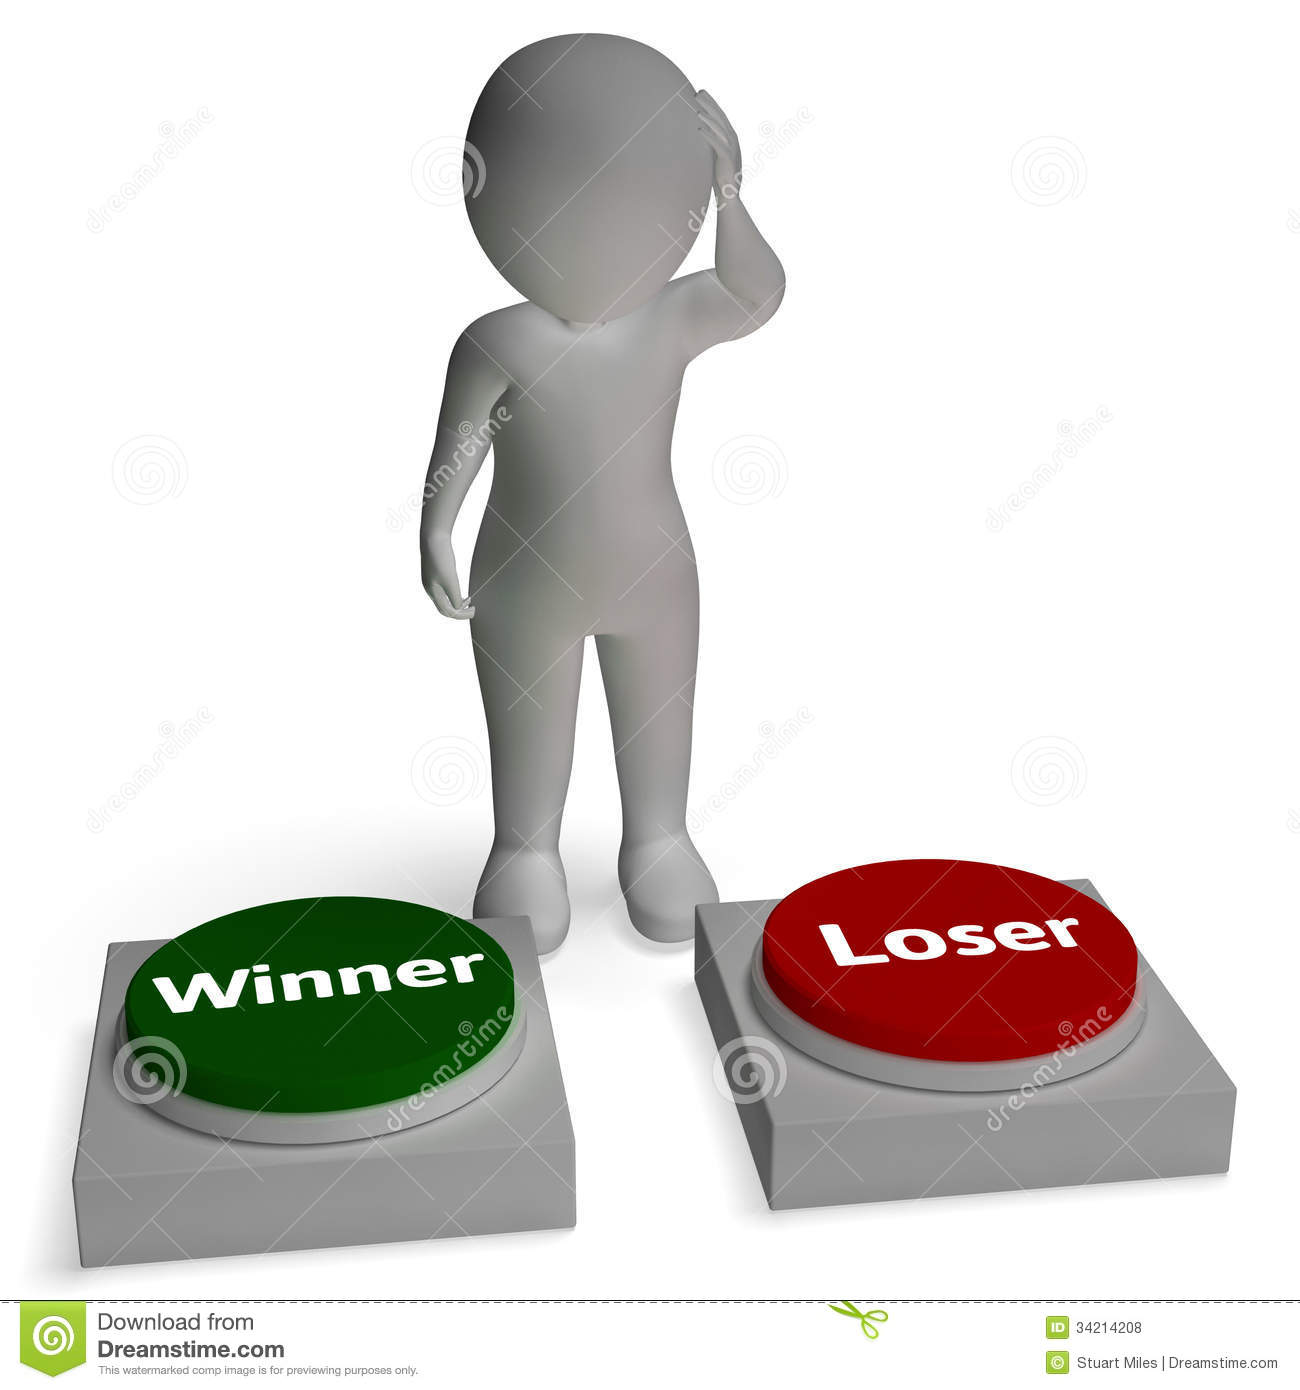 Winner Loser Buttons Shows Winning Or Losing Royalty Free Stock Photos